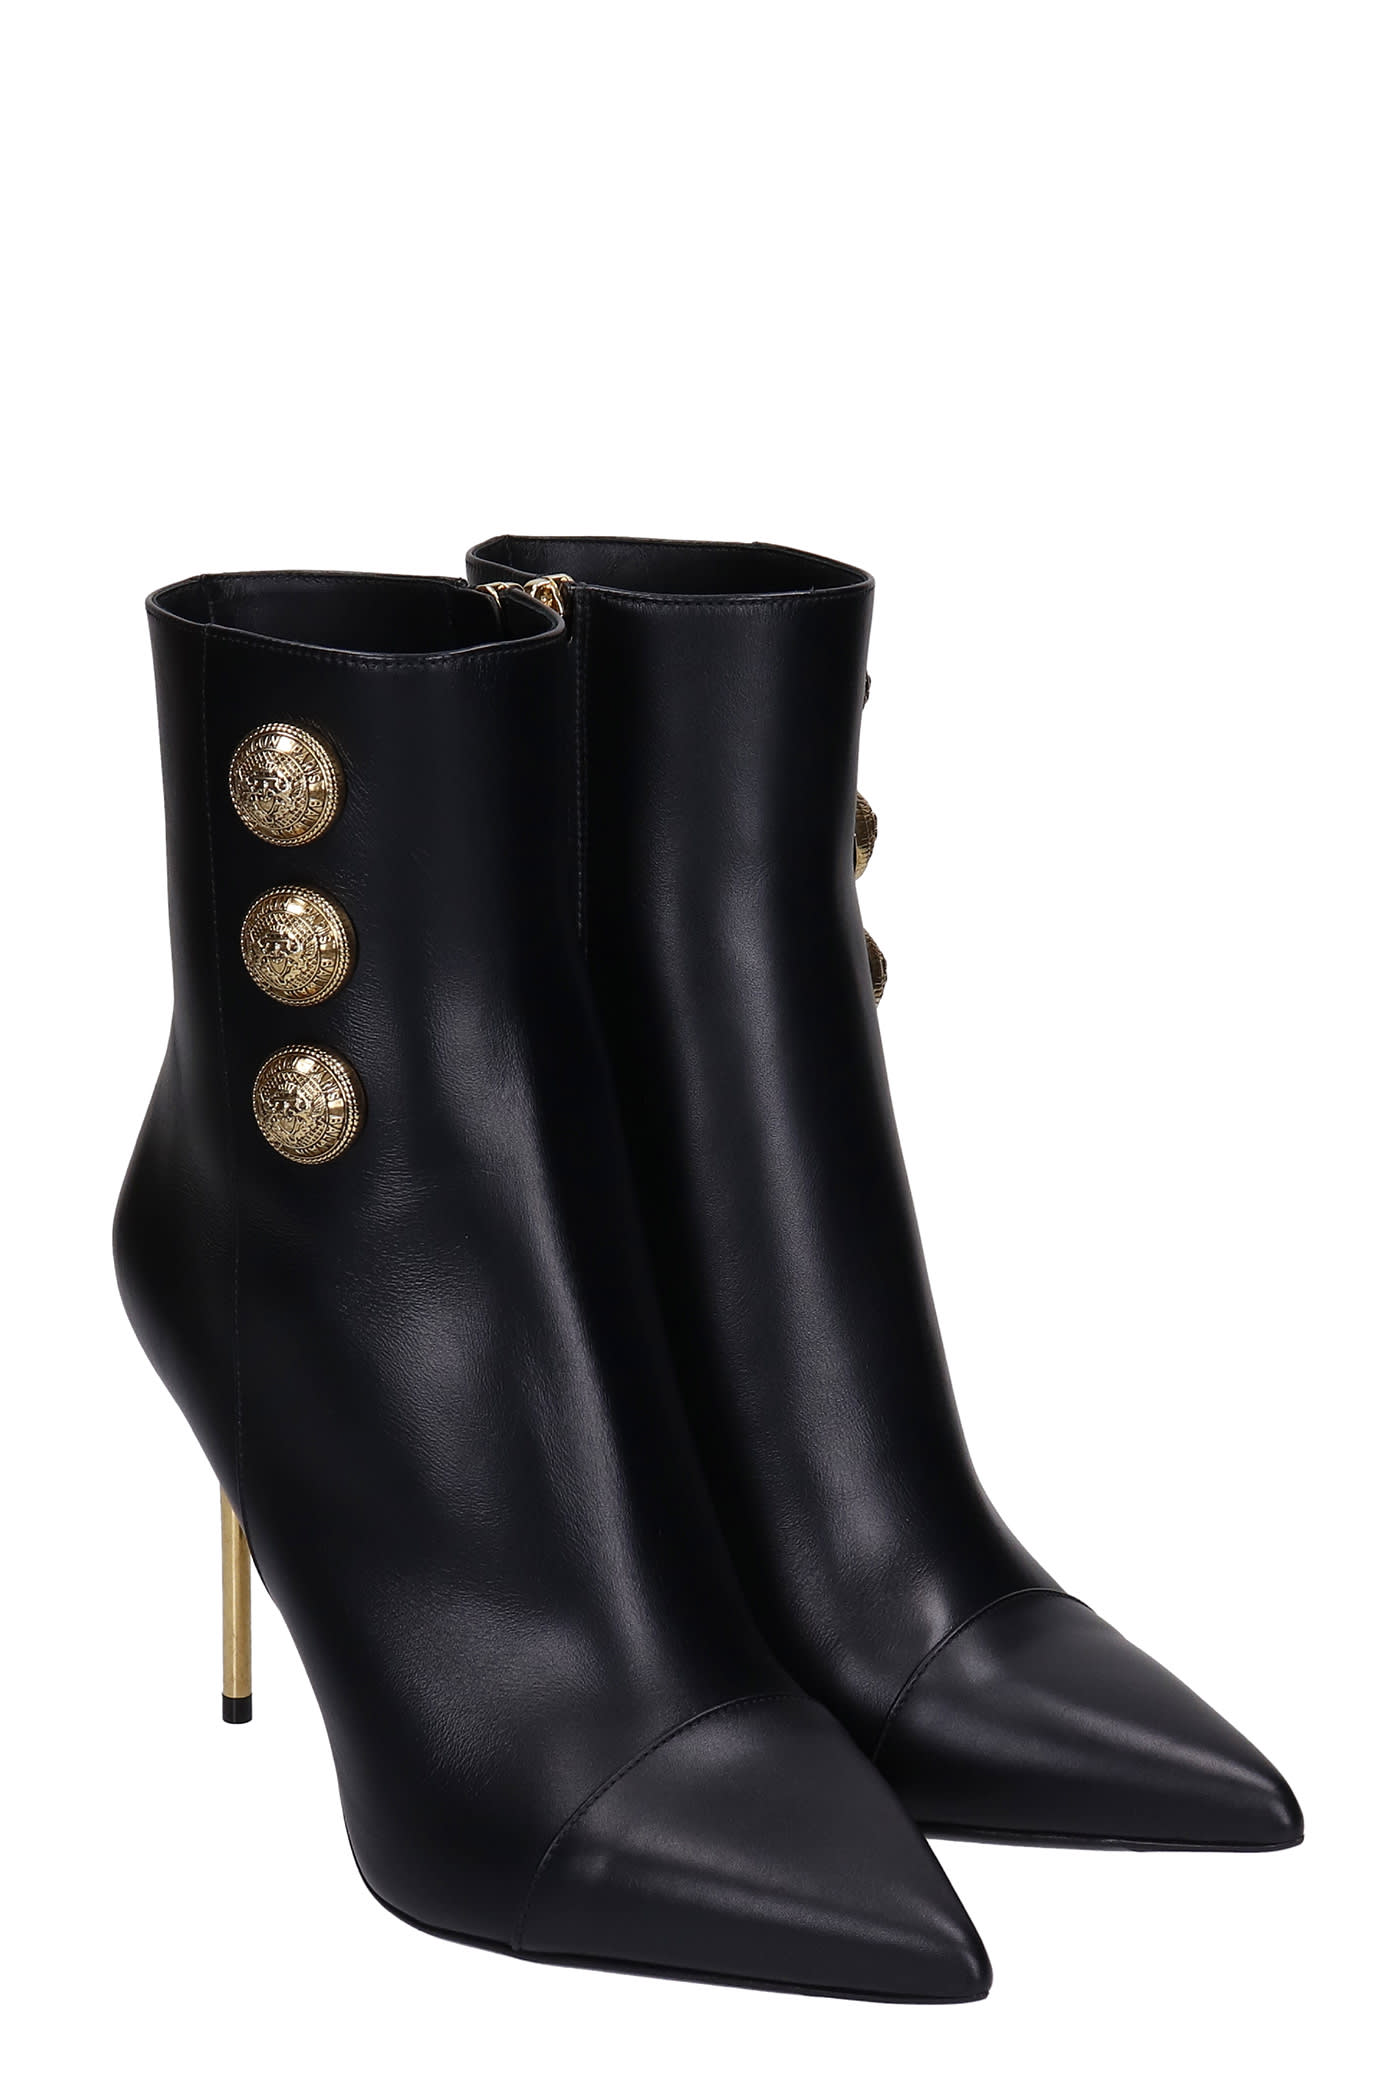 Buy Balmain Roni High Heels Ankle Boots In Black Leather online, shop Balmain shoes with free shipping